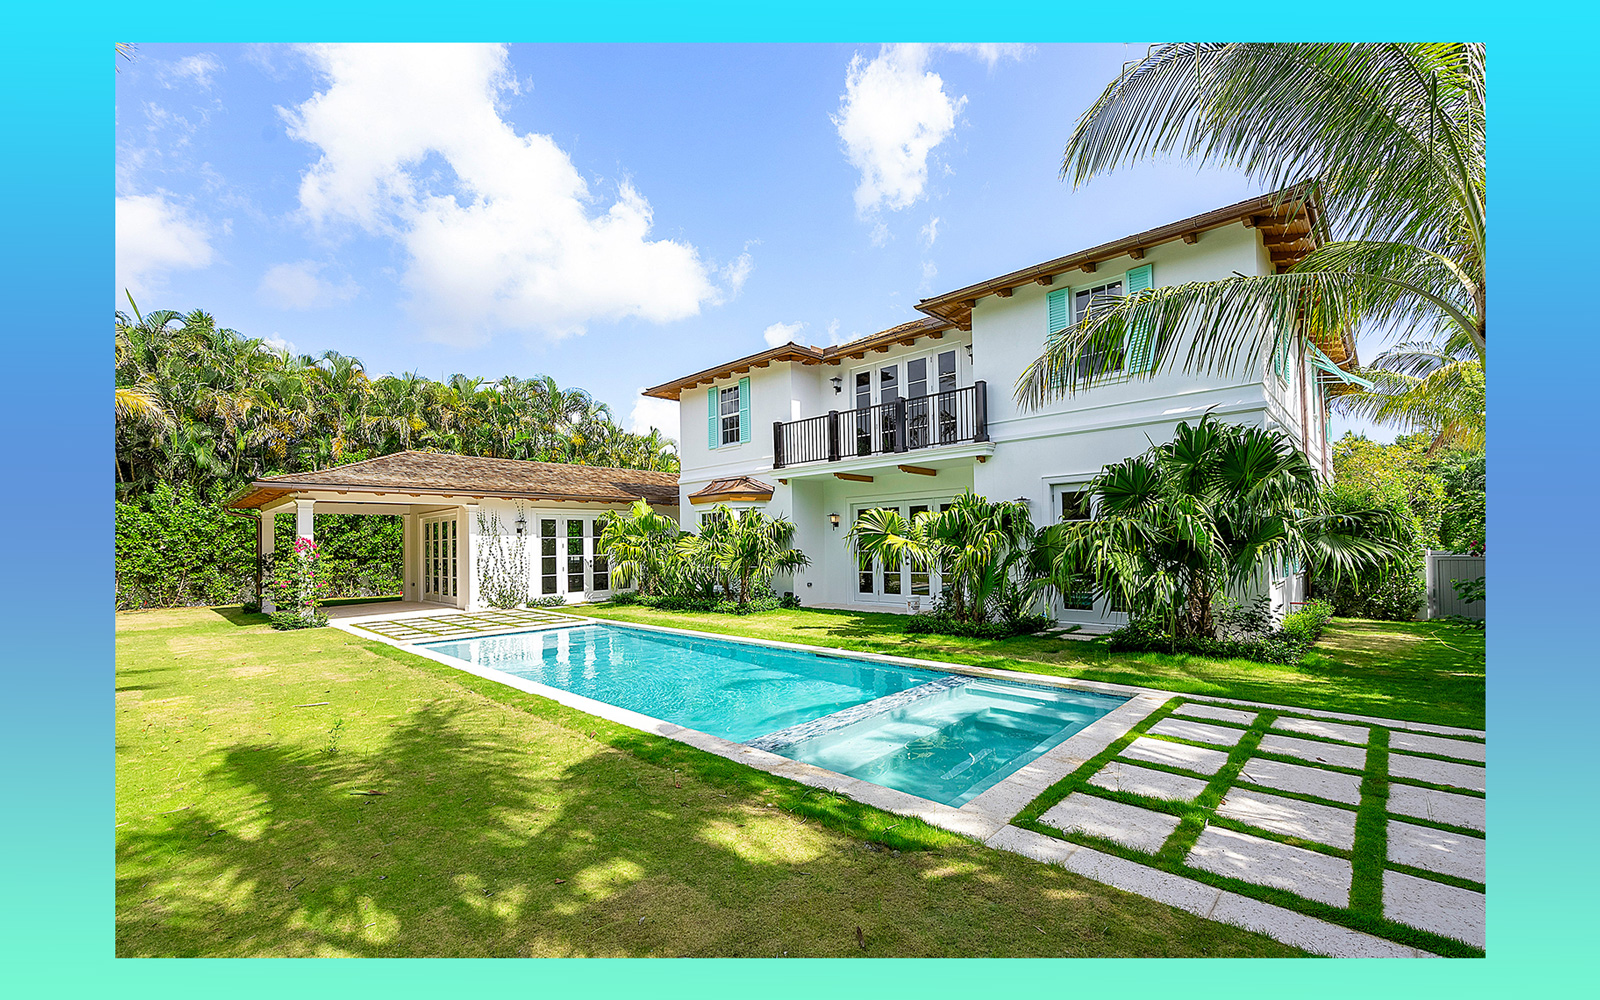 Lee Fensterstock Sells Palm Beach Spec Home for $17M